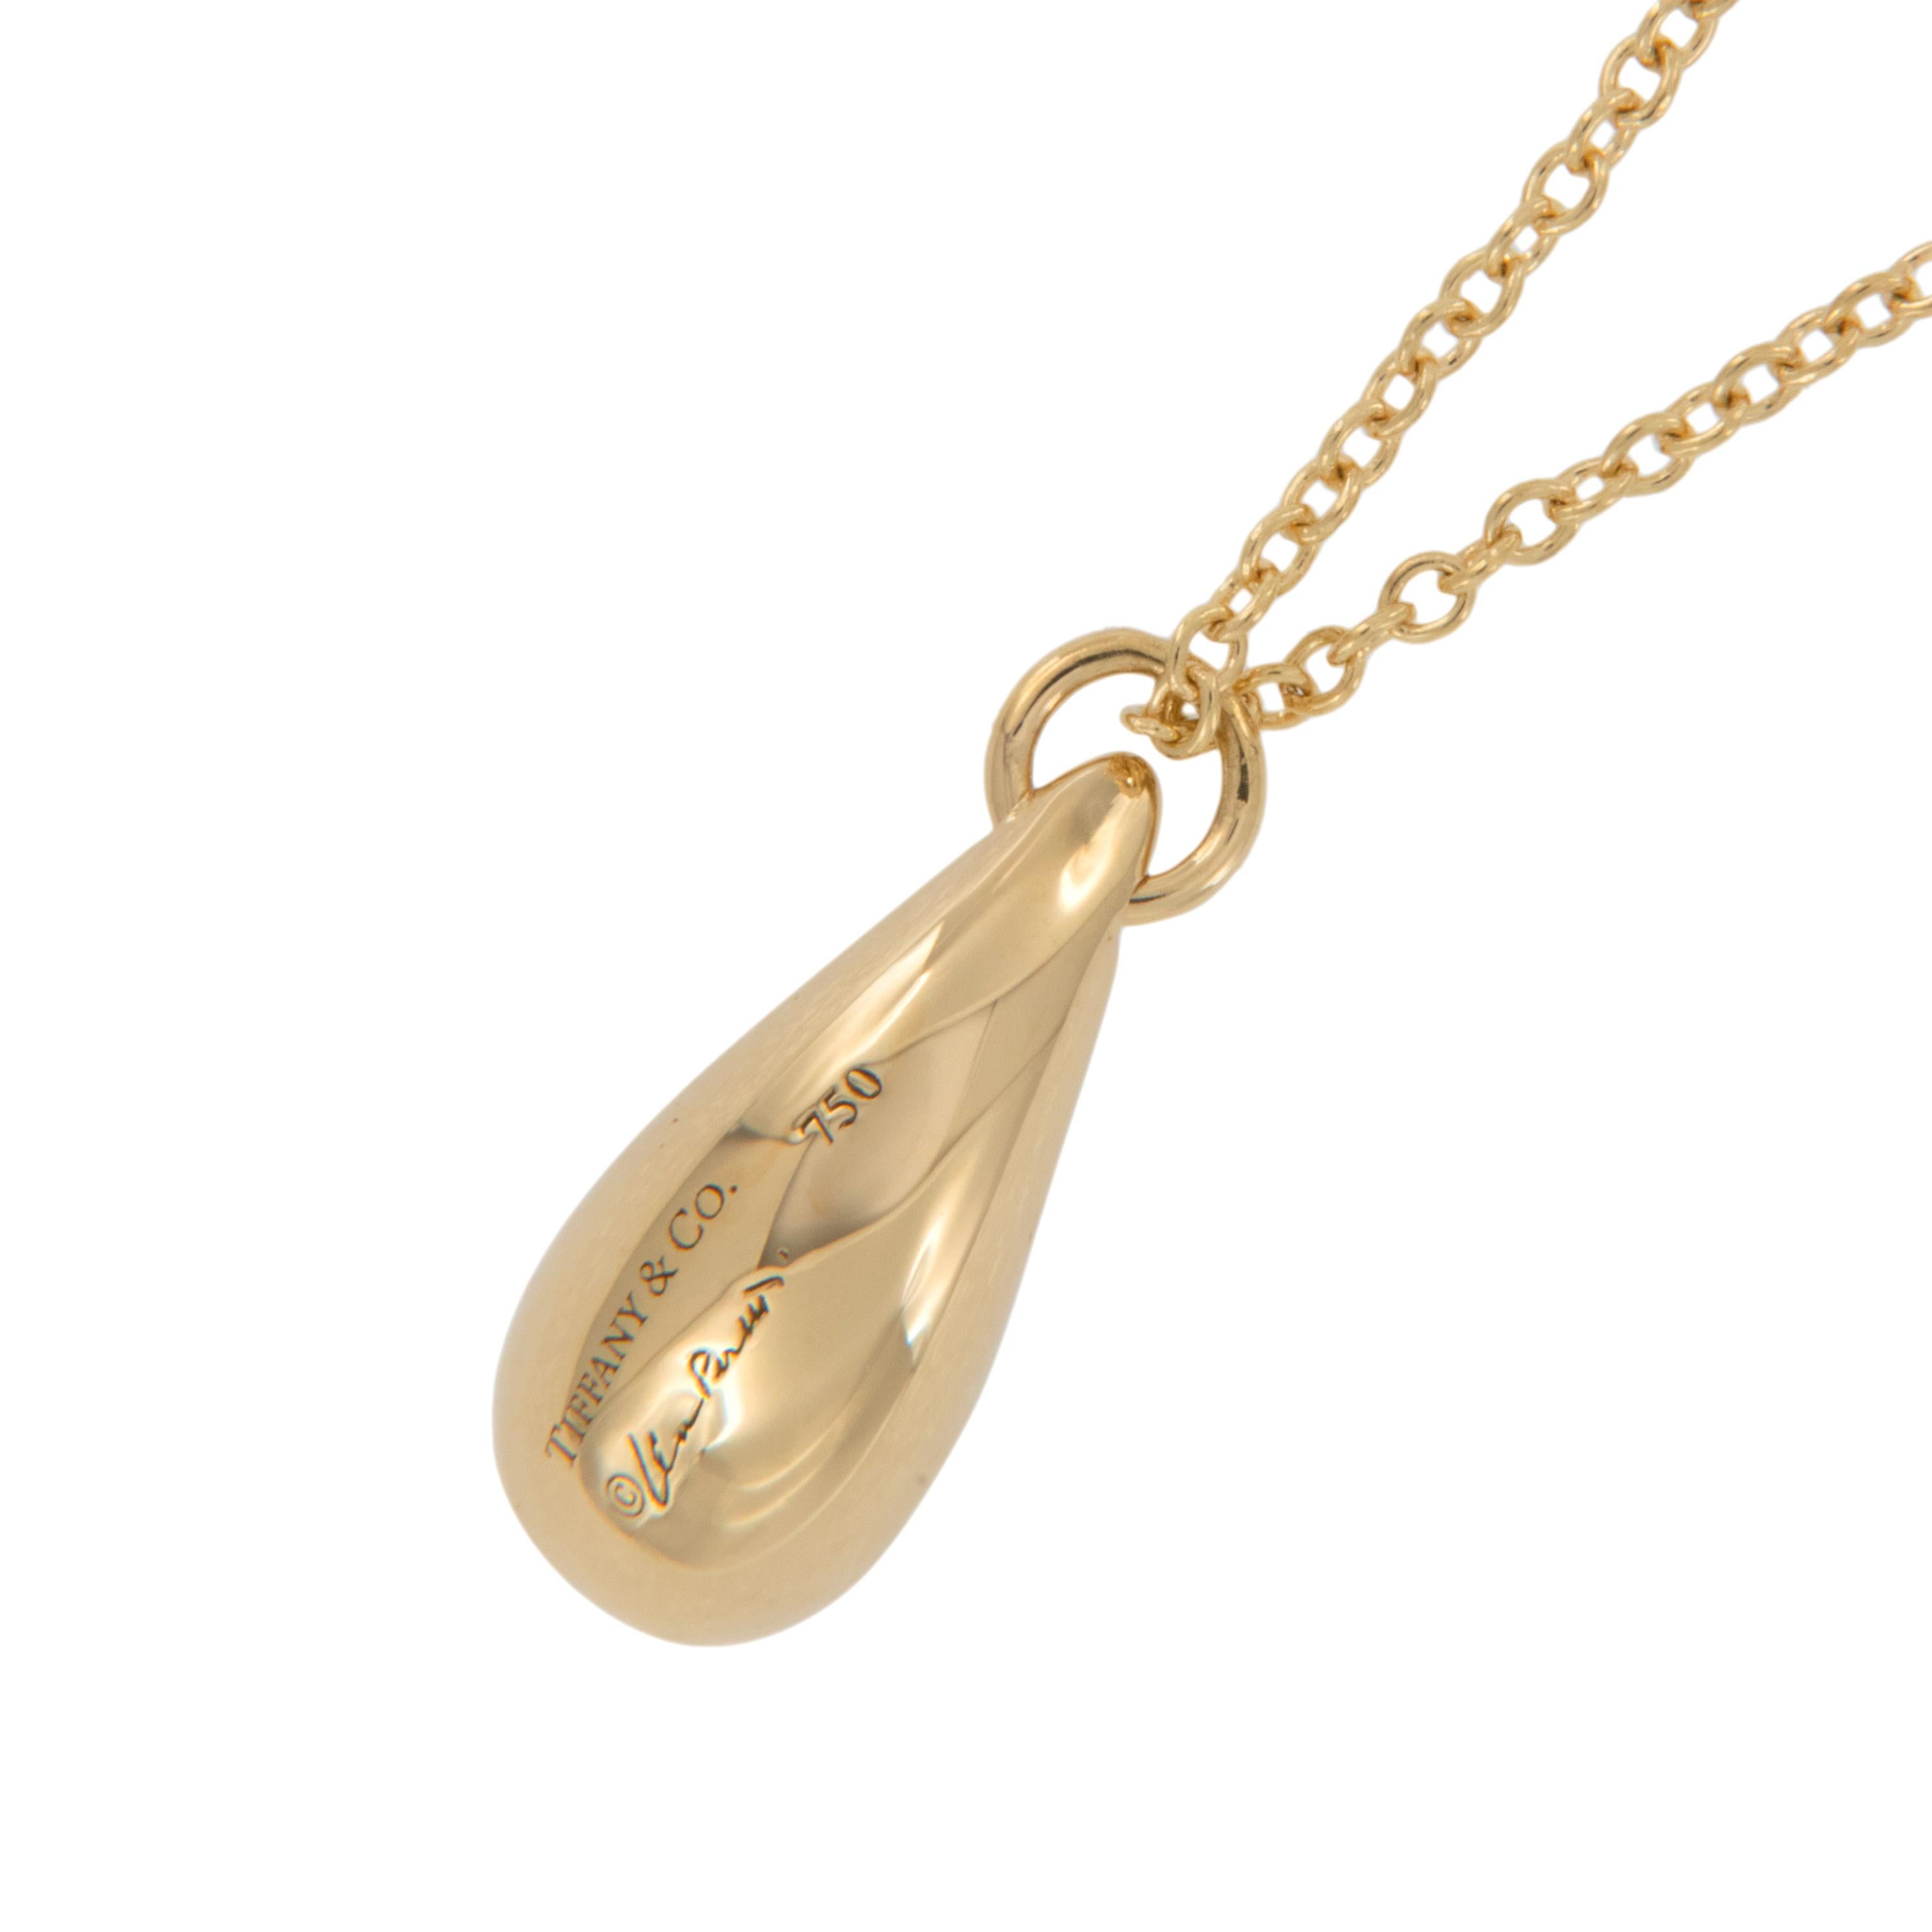 Everyone should own something iconic, here is your chance! This 18 karat yellow gold Elsa Peretti for Tiffany & Co teardrop necklace 